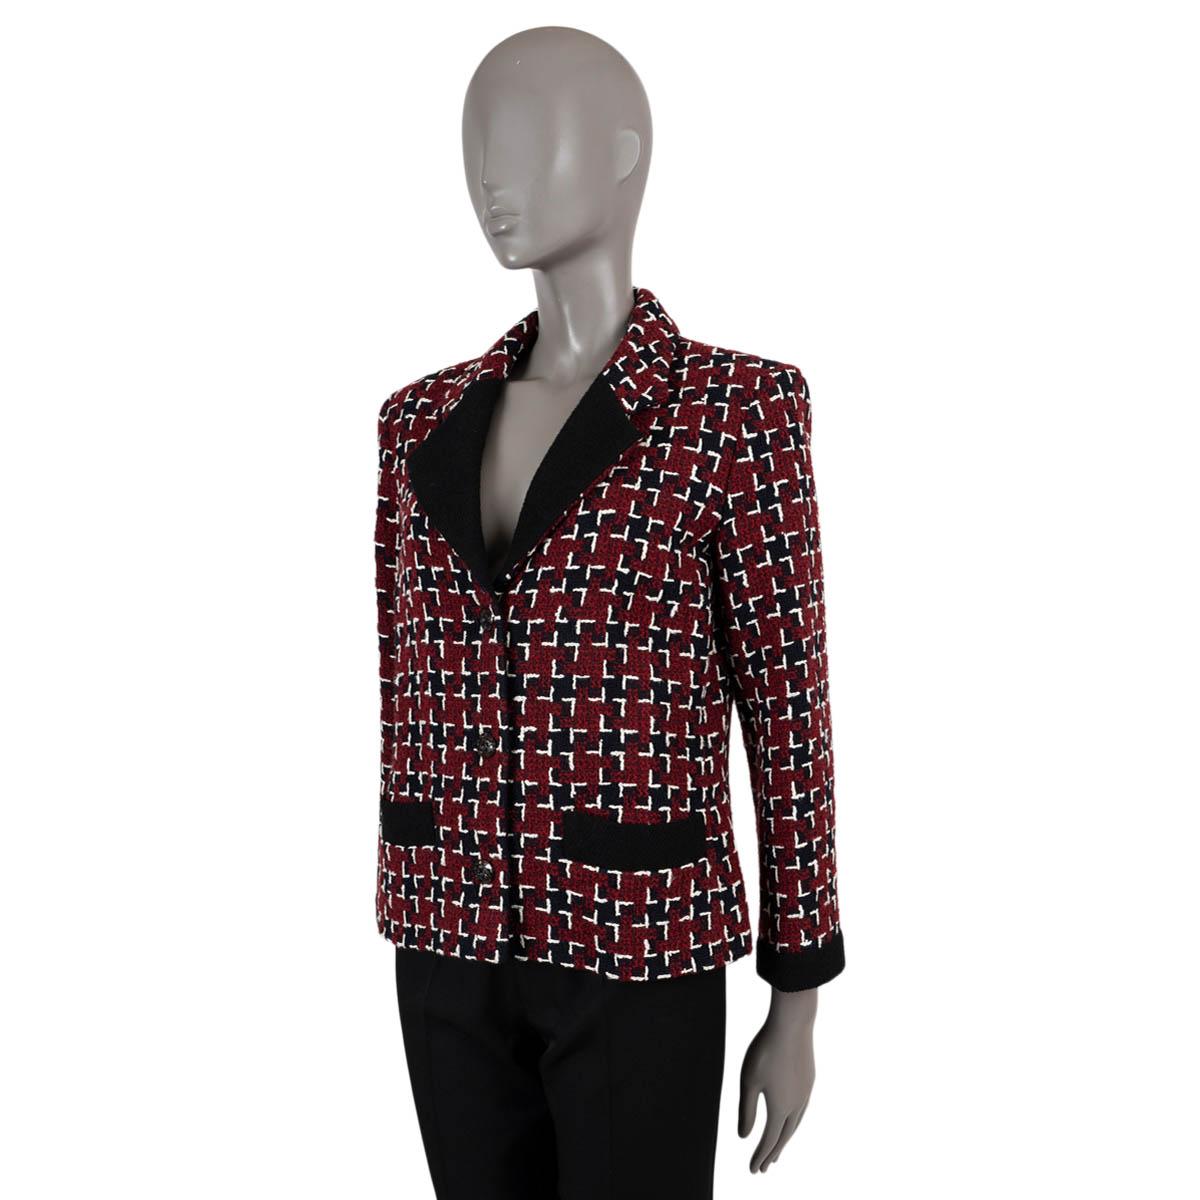 100% authentic Chanel houndstooth tweed jacket in burgundy, black and white wool (87%), cotton (7%) and nylon (6%). Features black peak lapel, trims and cuffs and two open pockets at the waist. Close with clear buttons on the front and is lined in